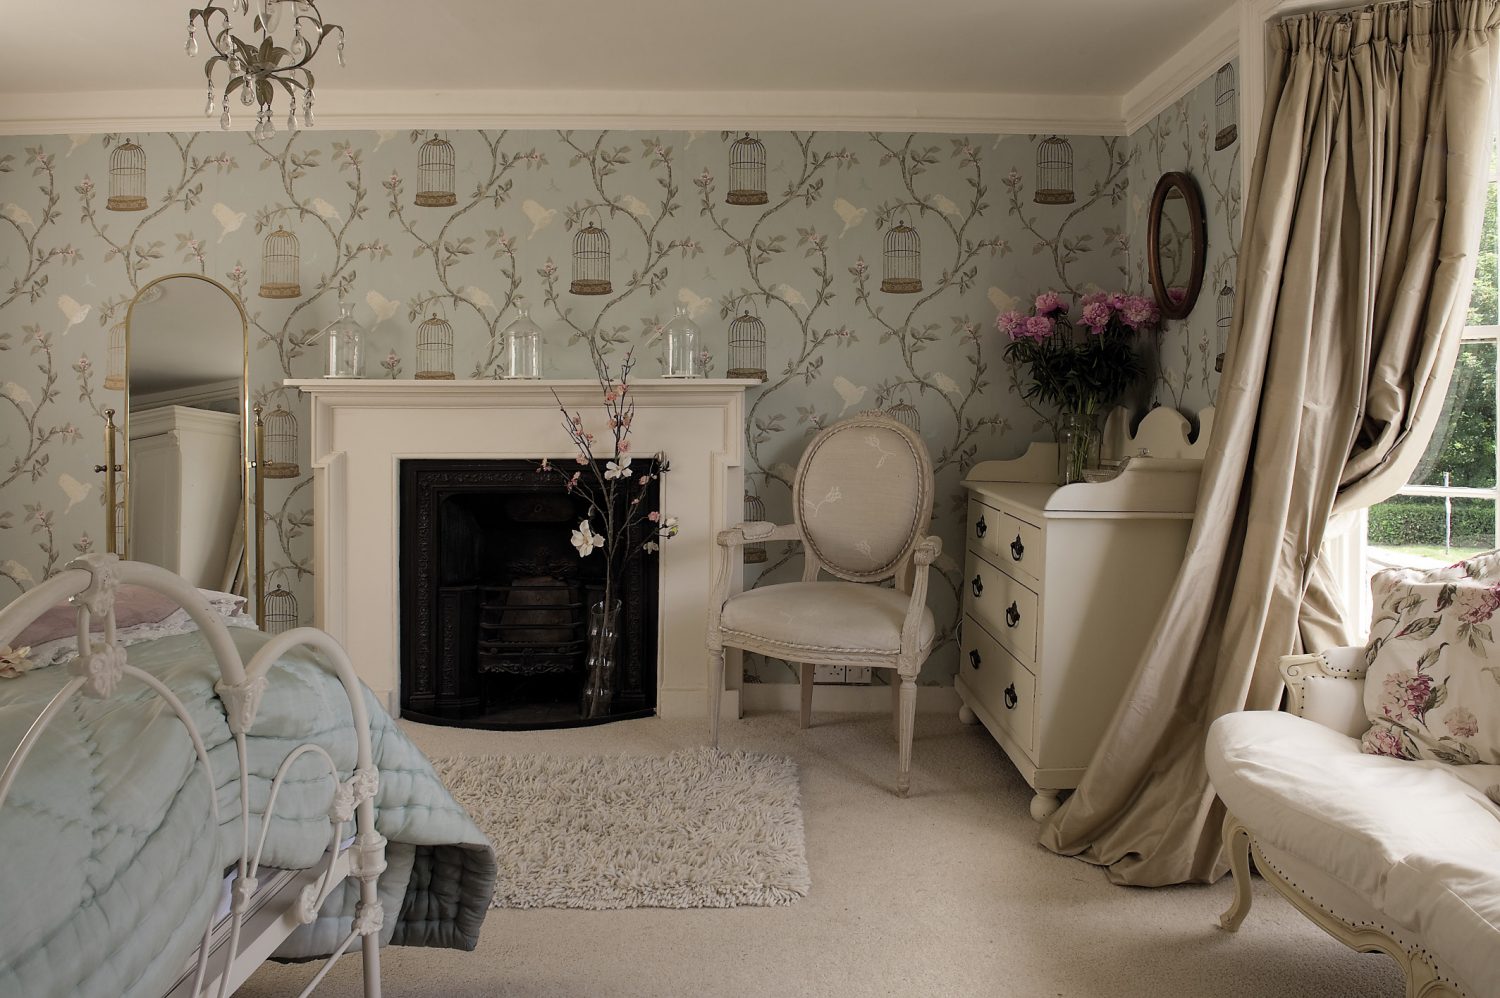 Along the corridor is the ‘Chambre Jolie’, papered in ‘Birdcage Walk’ by Nina Campbell. A French 18th century style sofa occupies the space in the bay window and is framed on either side by café au lait-coloured silk curtains. White painted furniture maintains the feeling of light and the iron bed is dressed with a handstitched eau de nil silk quilt